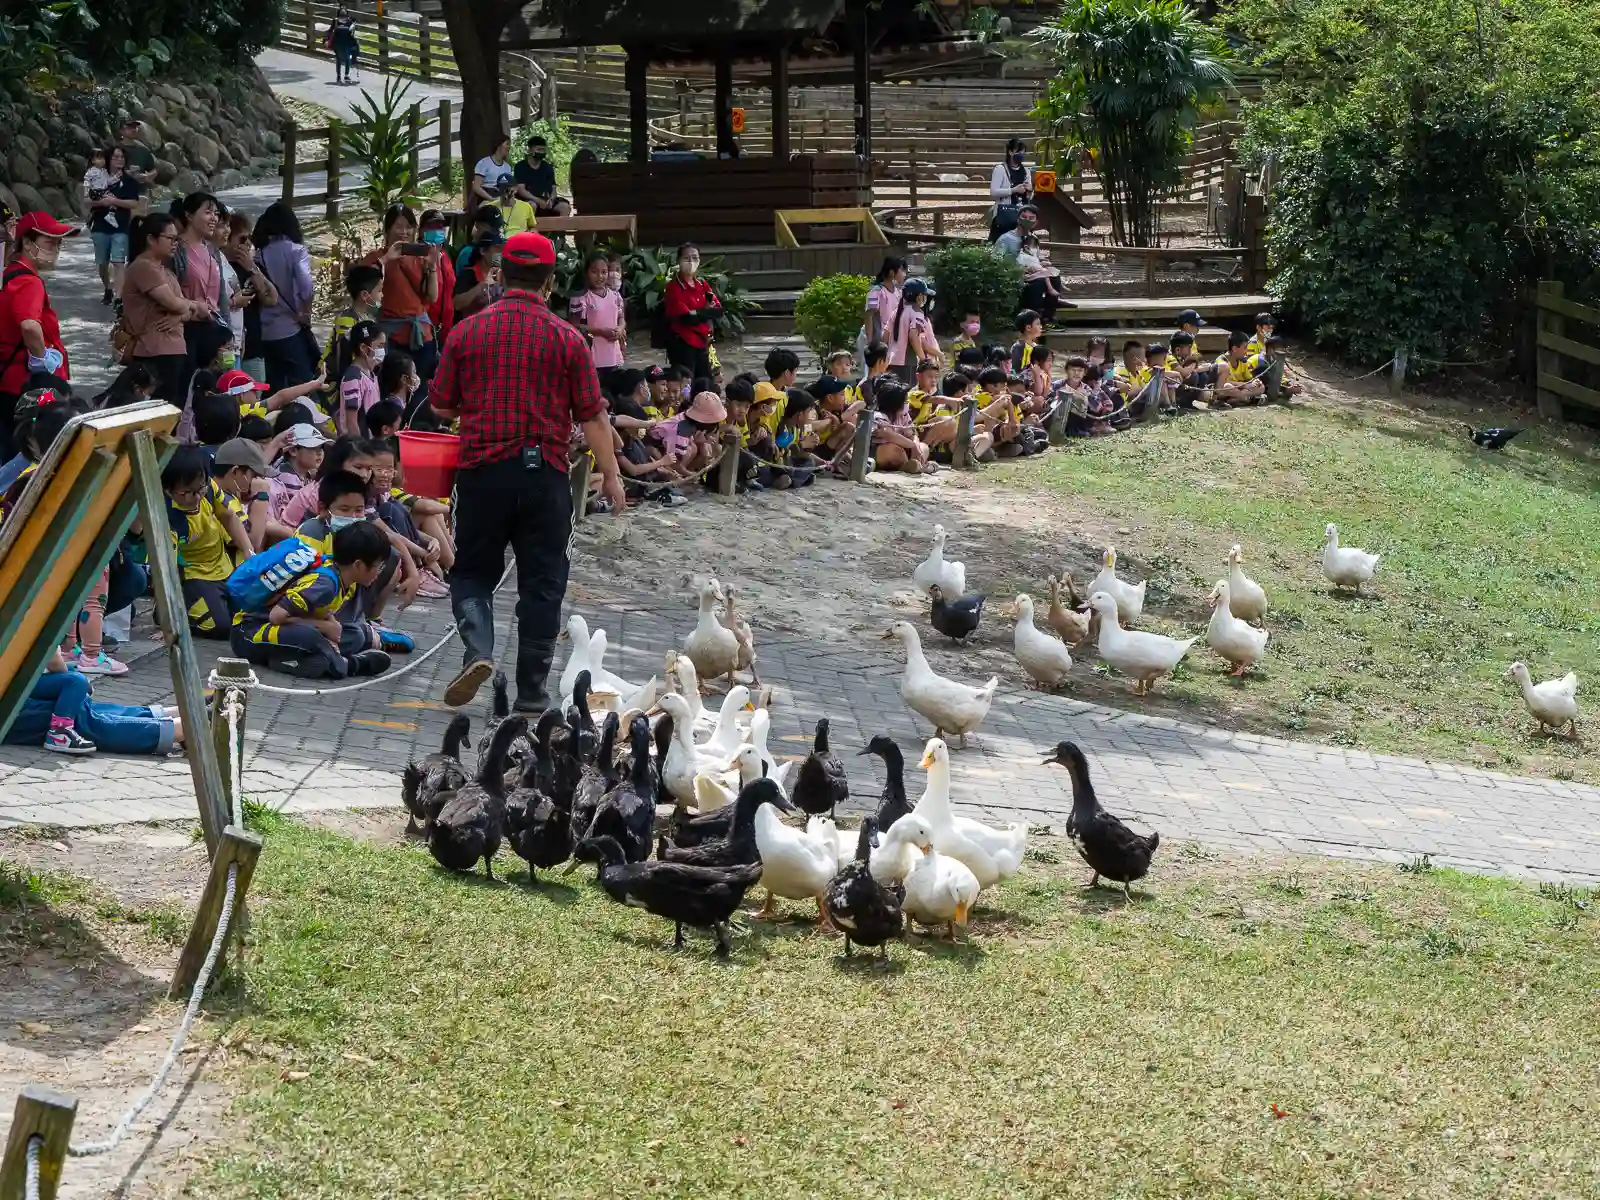 An employee is introducing the farm's ducks to an audience of children.